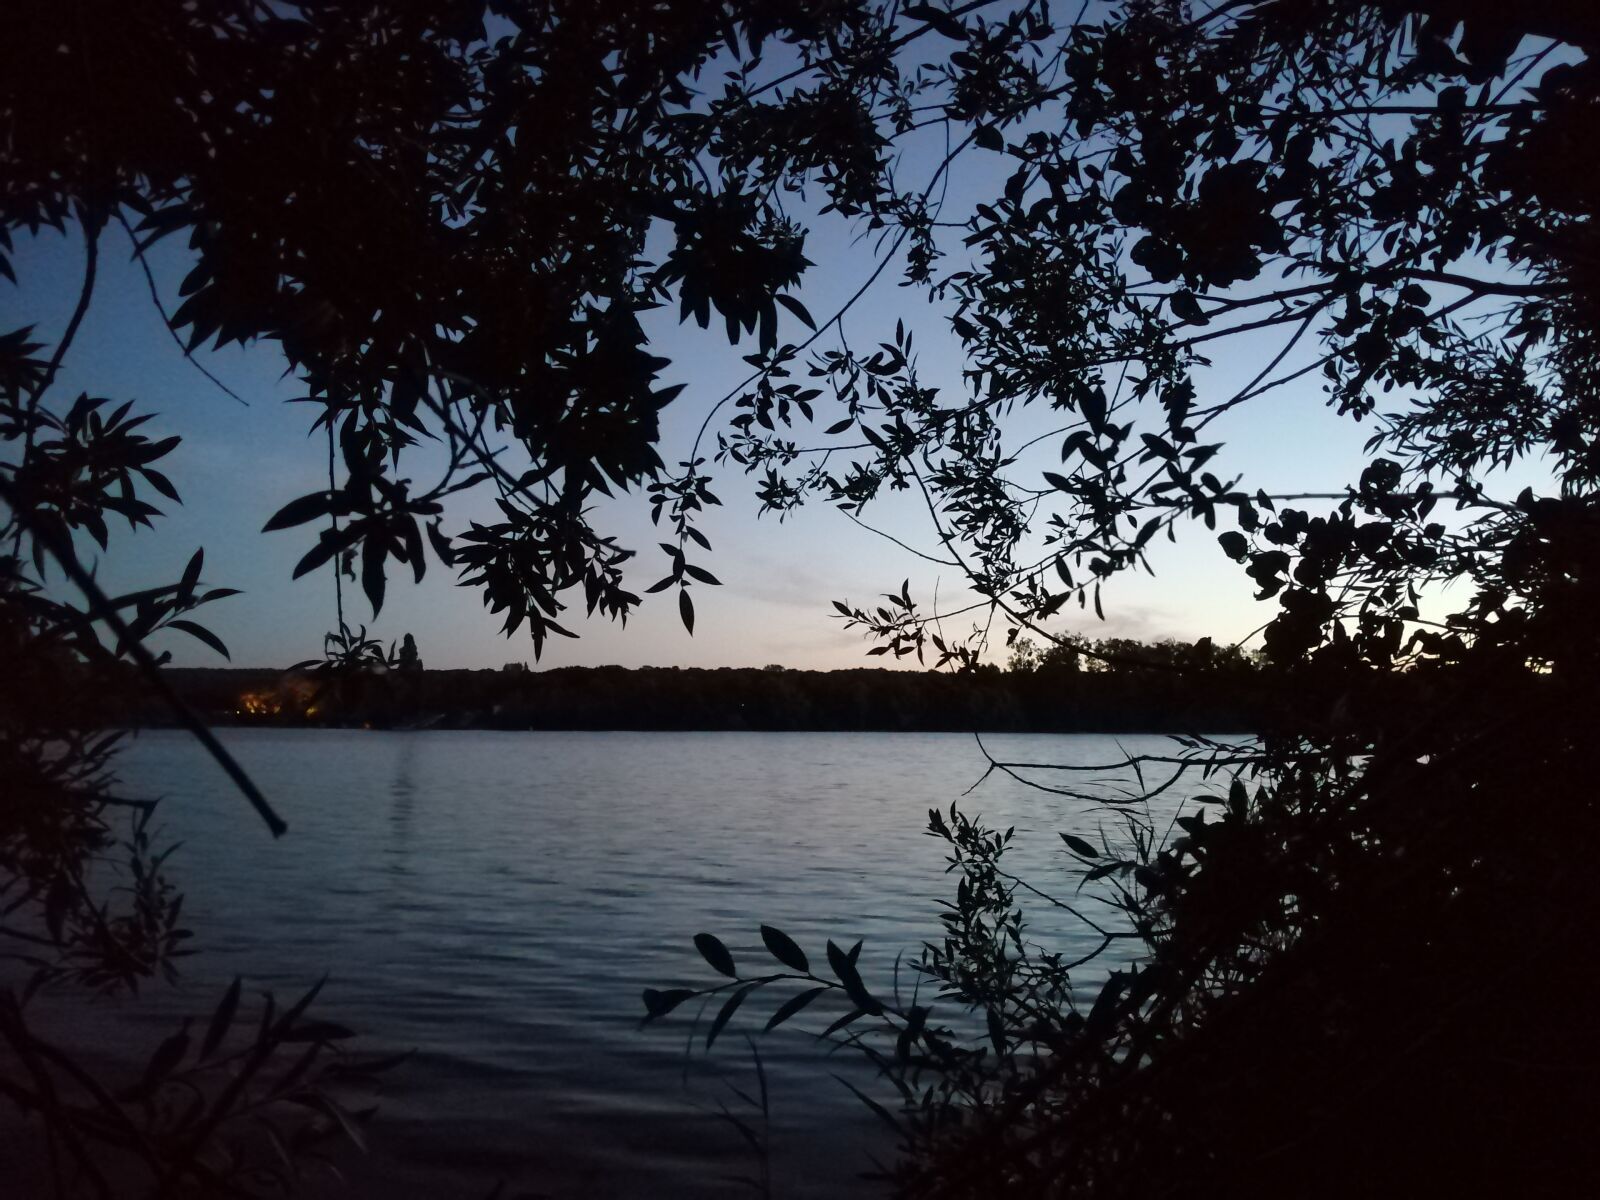 HUAWEI P SMART 2019 sample photo. Landscape water, early evening photography